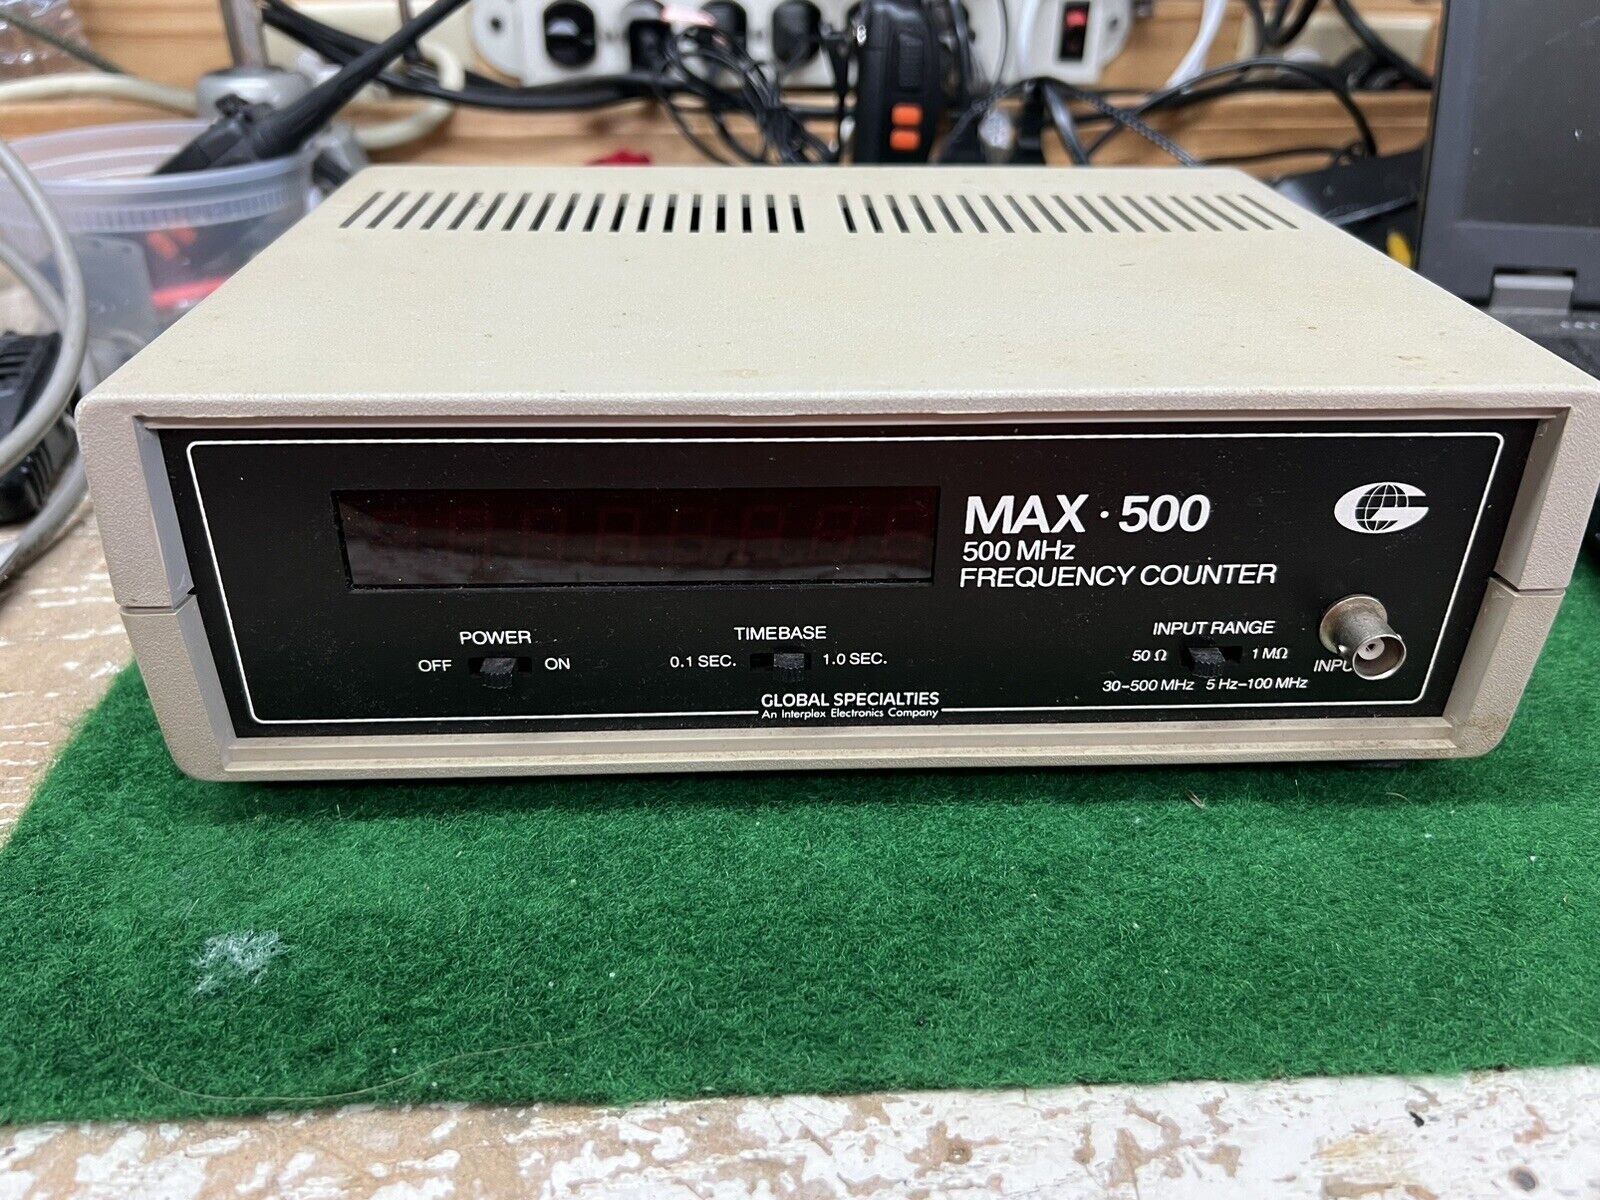 Max 500 500mhz Frequency Counter